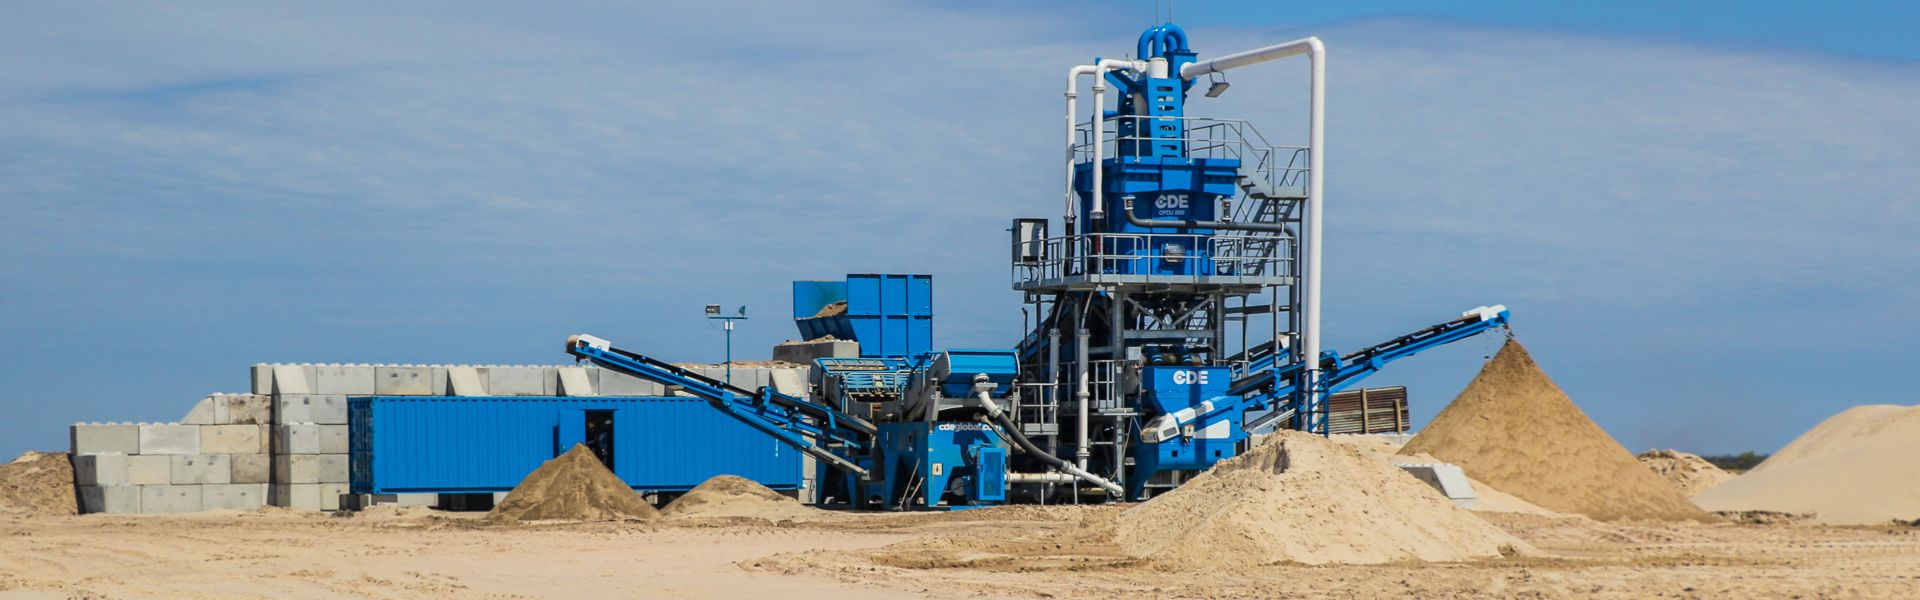 8th Annual Frac Sand Industry Update